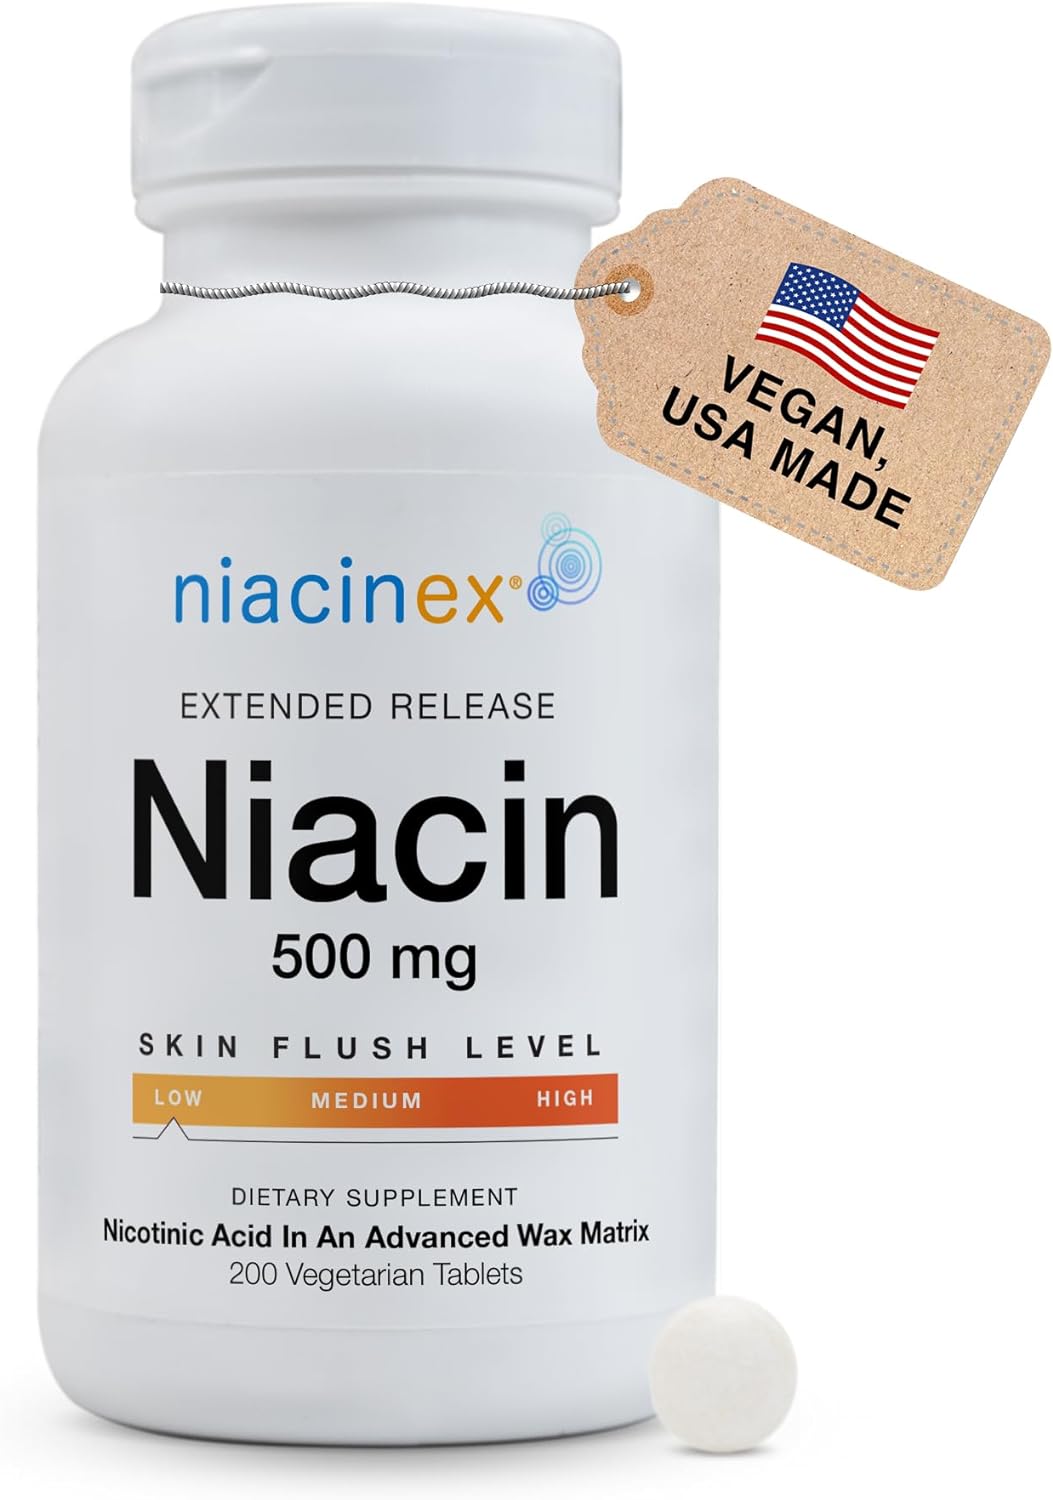 Niacin 500mg Extended Time Release Tablets Minimal to No-Flush, Vitamin B3 Supplement - Cholesterol Balance, Nicotinic Acid - Vegan, cGMP, Made in The USA - 200 Count (1)